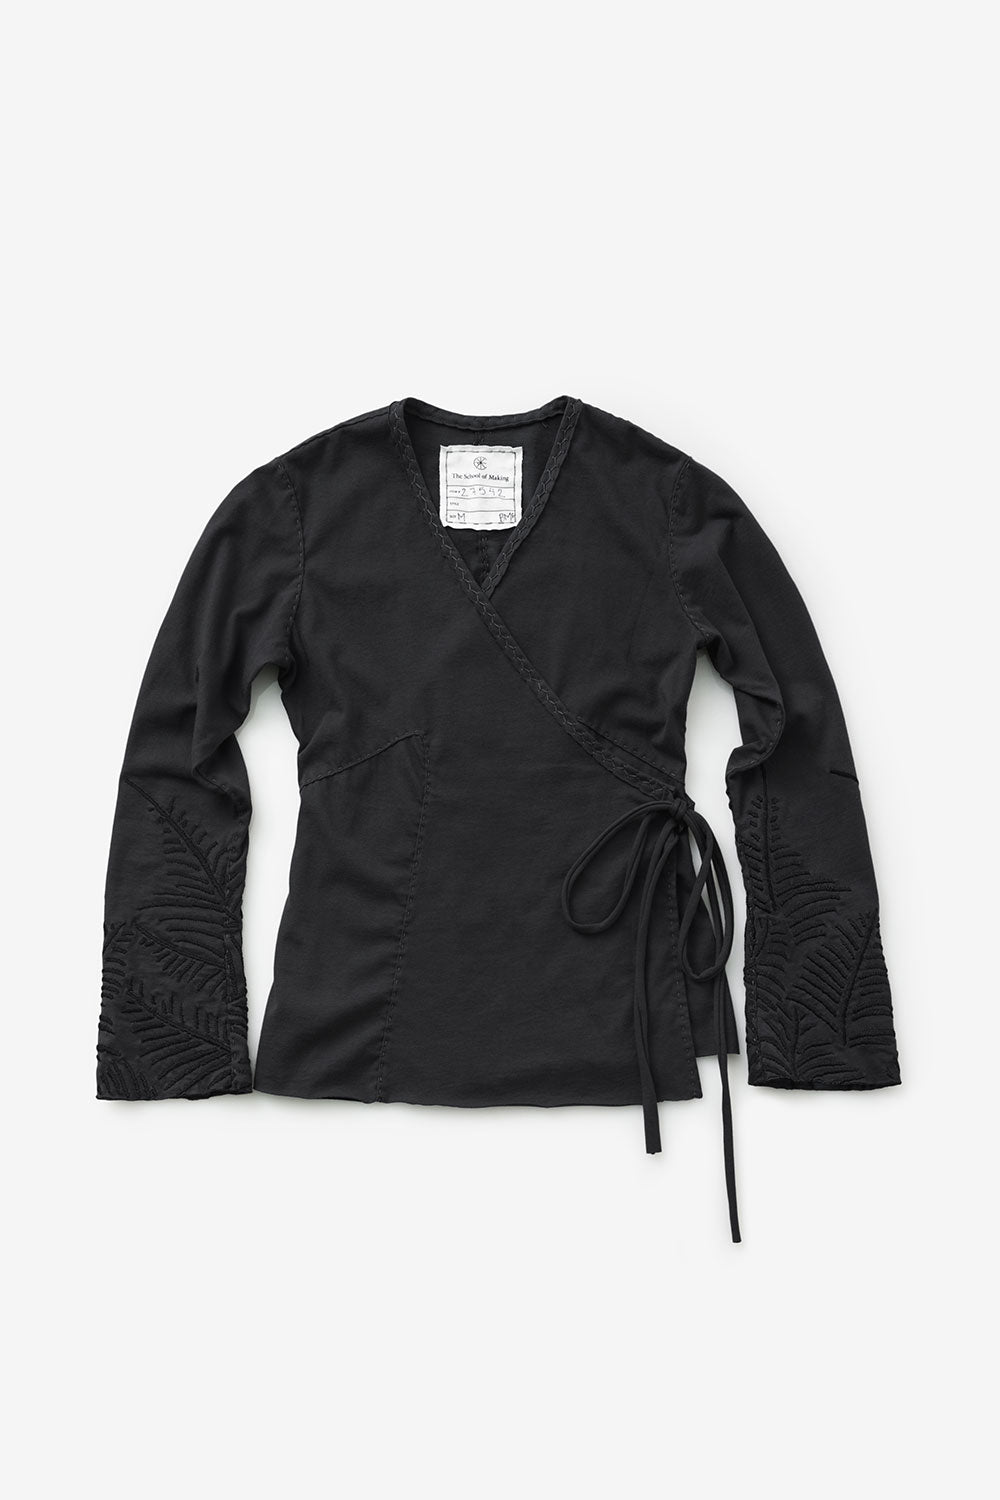 The School of Making DIY Long Sleeves Wrap Top Kit made with Organic Cotton Black